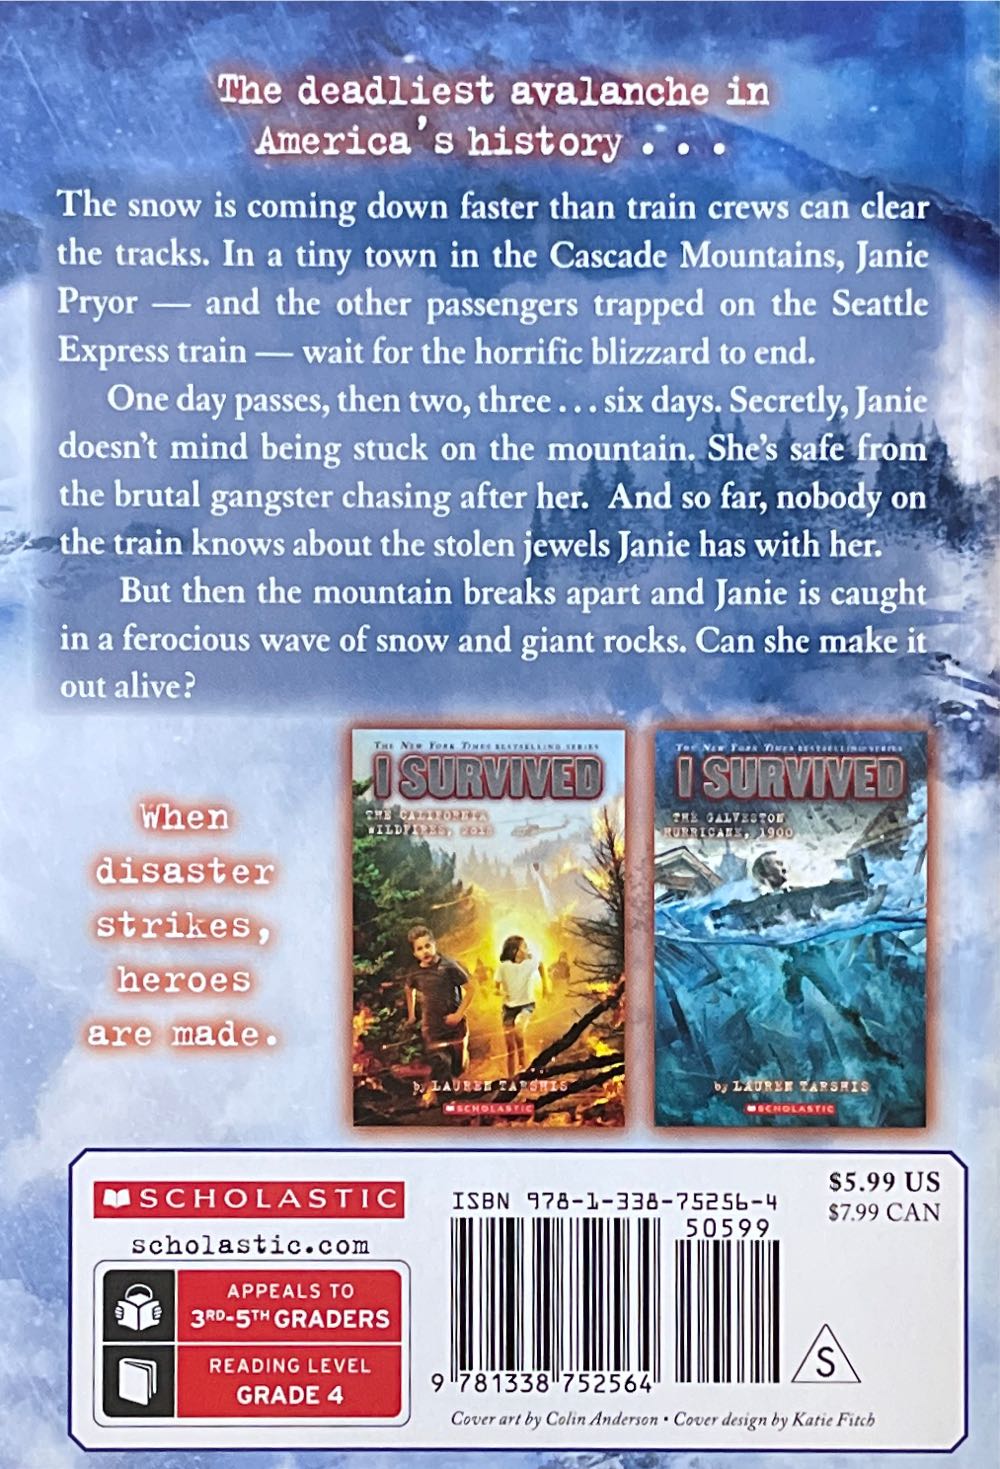 I Survived The Wellington Avalanche, 1910 - Lauren Tarshis (Scholastic Incorporated - Paperback) book collectible [Barcode 9781338752564] - Main Image 2